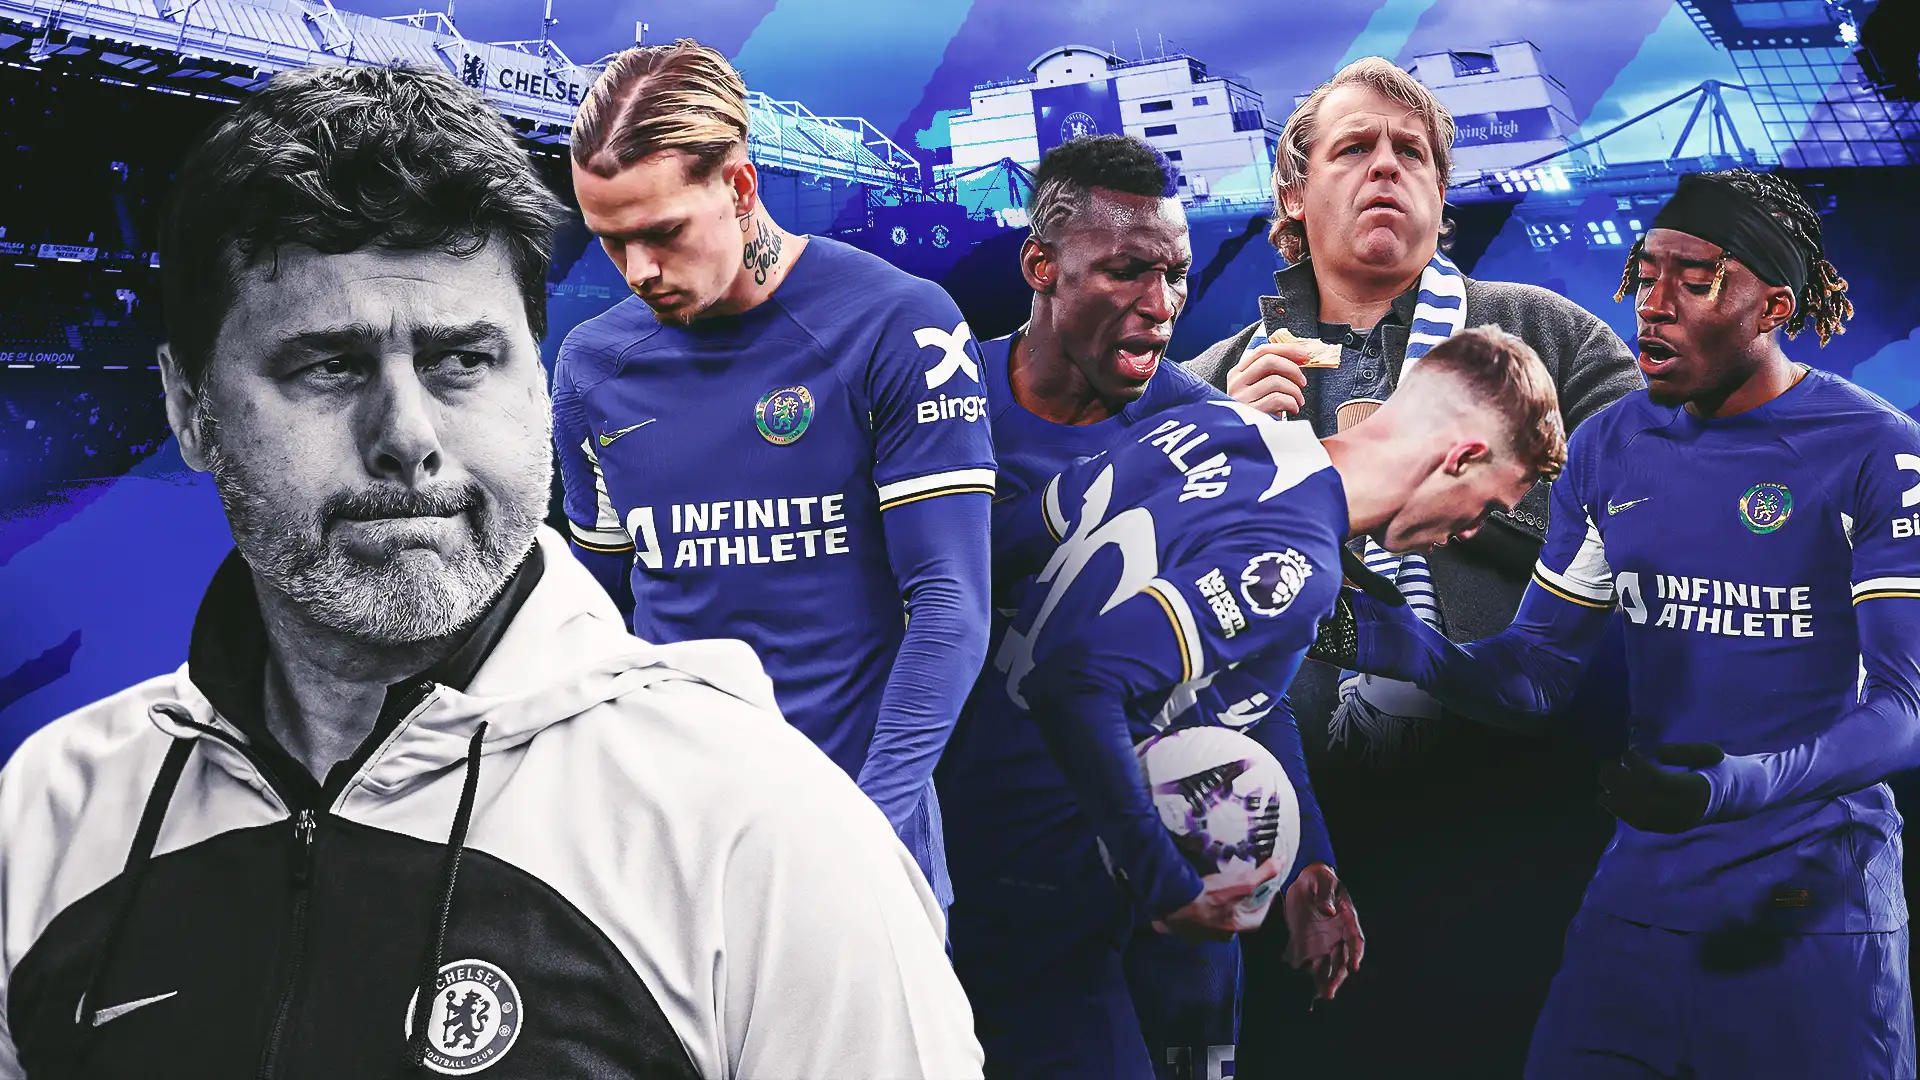 Chelsea's owners are clueless! Worst-run club in football have made yet another massive mistake with Mauricio Pochettino's exit - and now Stamford Bridge could turn toxic